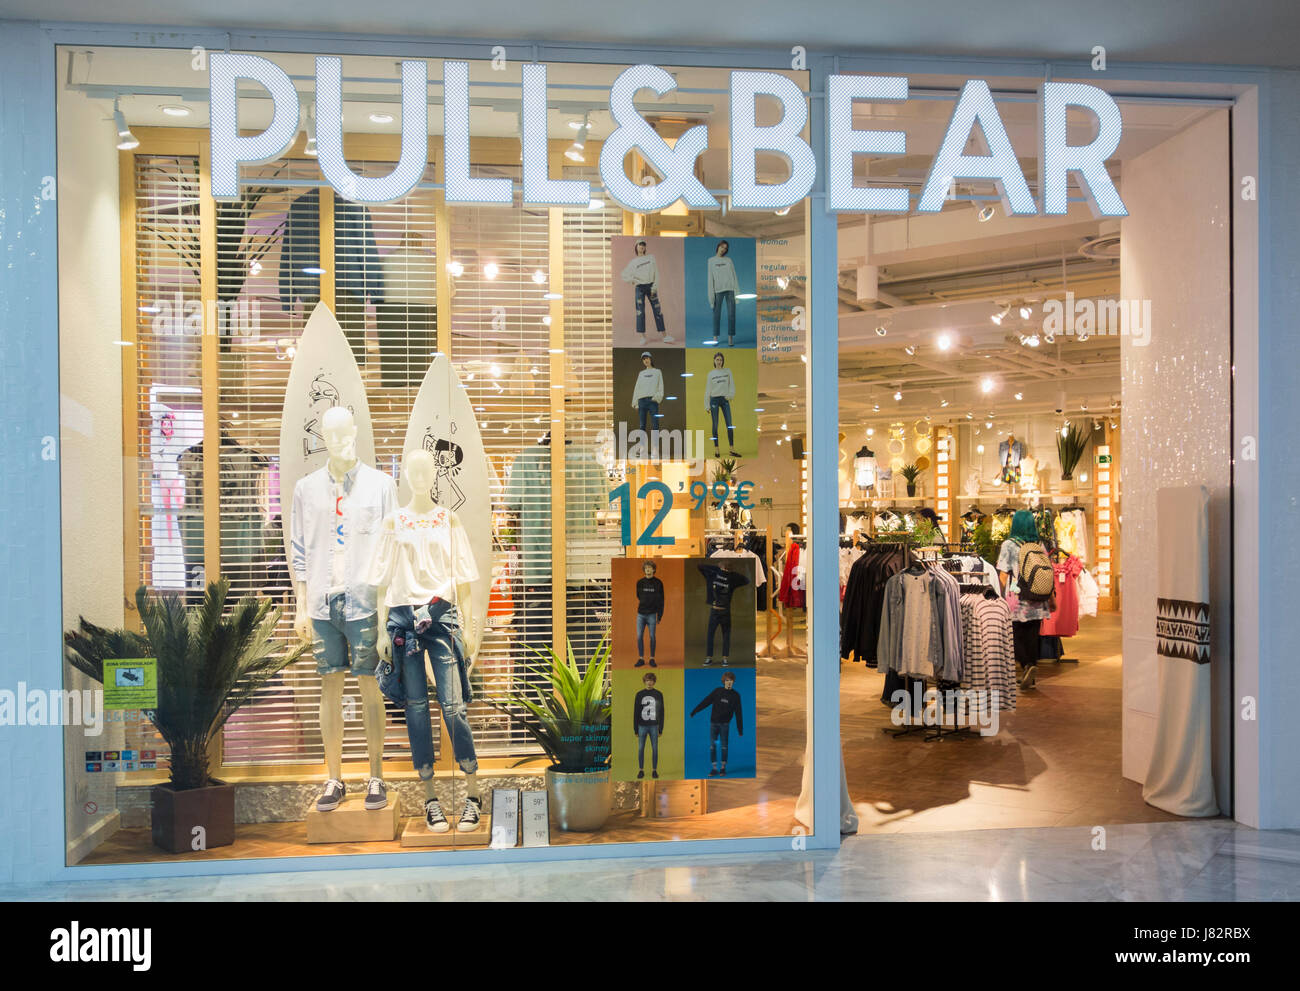 Pull & Bear clothing store in Spain Stock Photo - Alamy